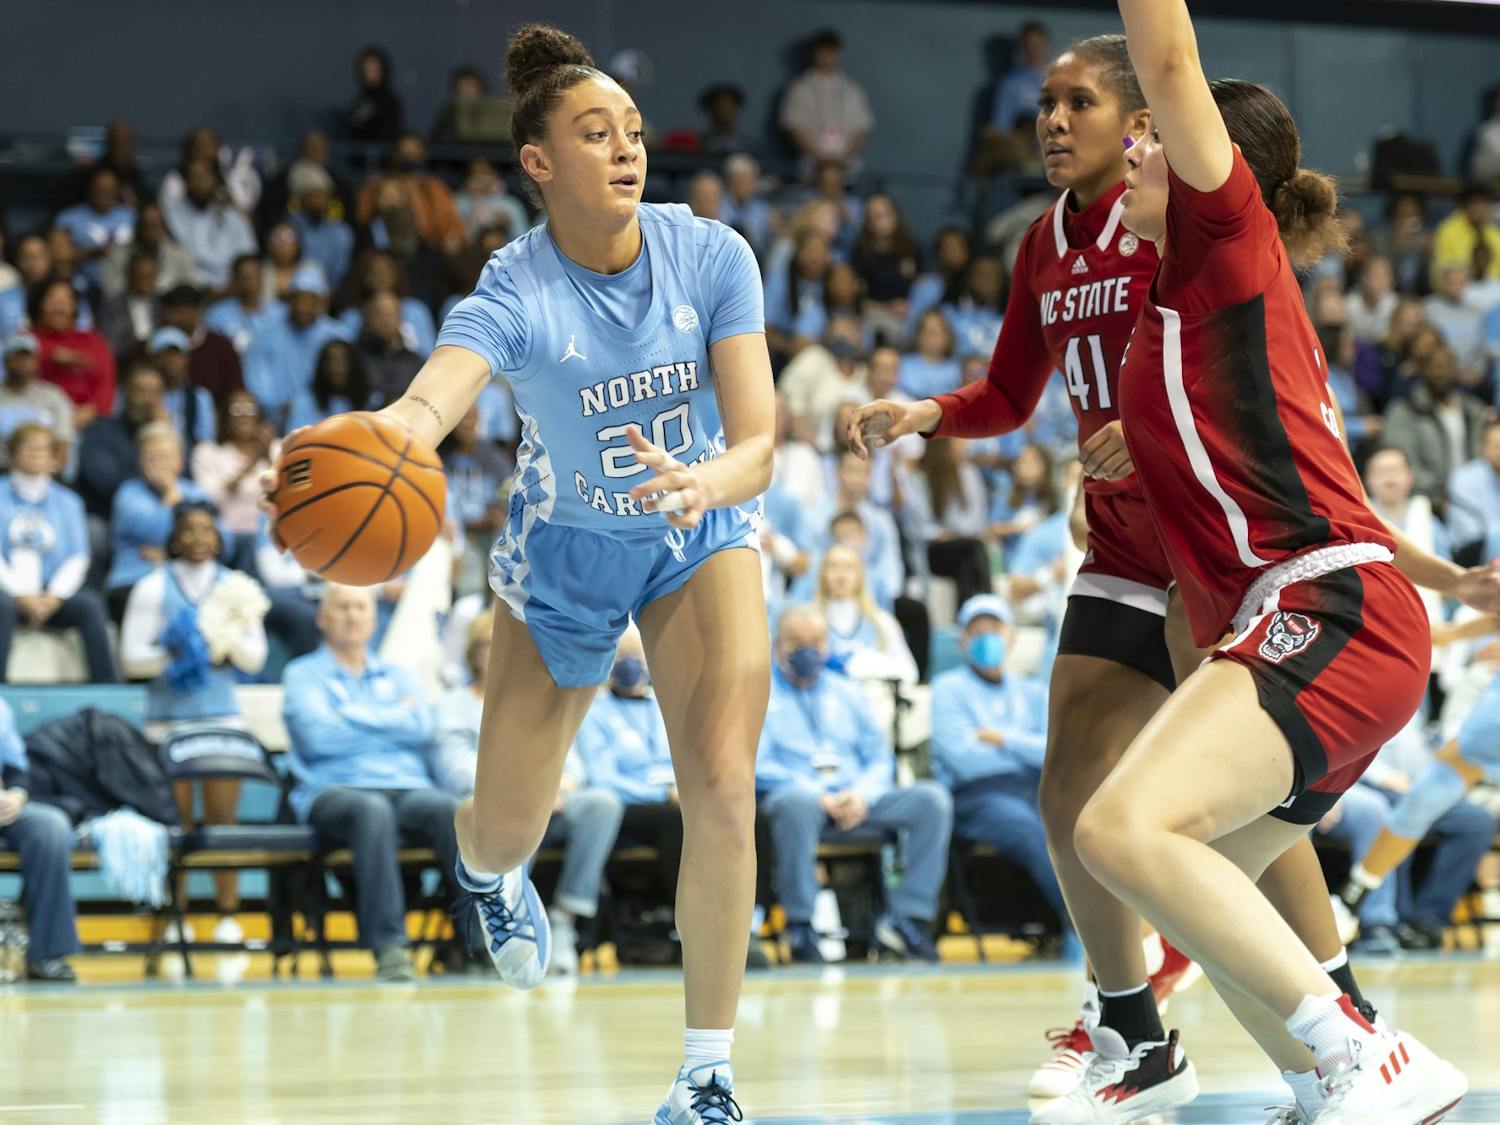 UNC sophomore forward Destiny Adams (20) passes the ball during the women's basketball game against N.C. State at Carmichael Arena on Sunday, Jan. 15, 2023. UNC beat N.C. State 56-47.